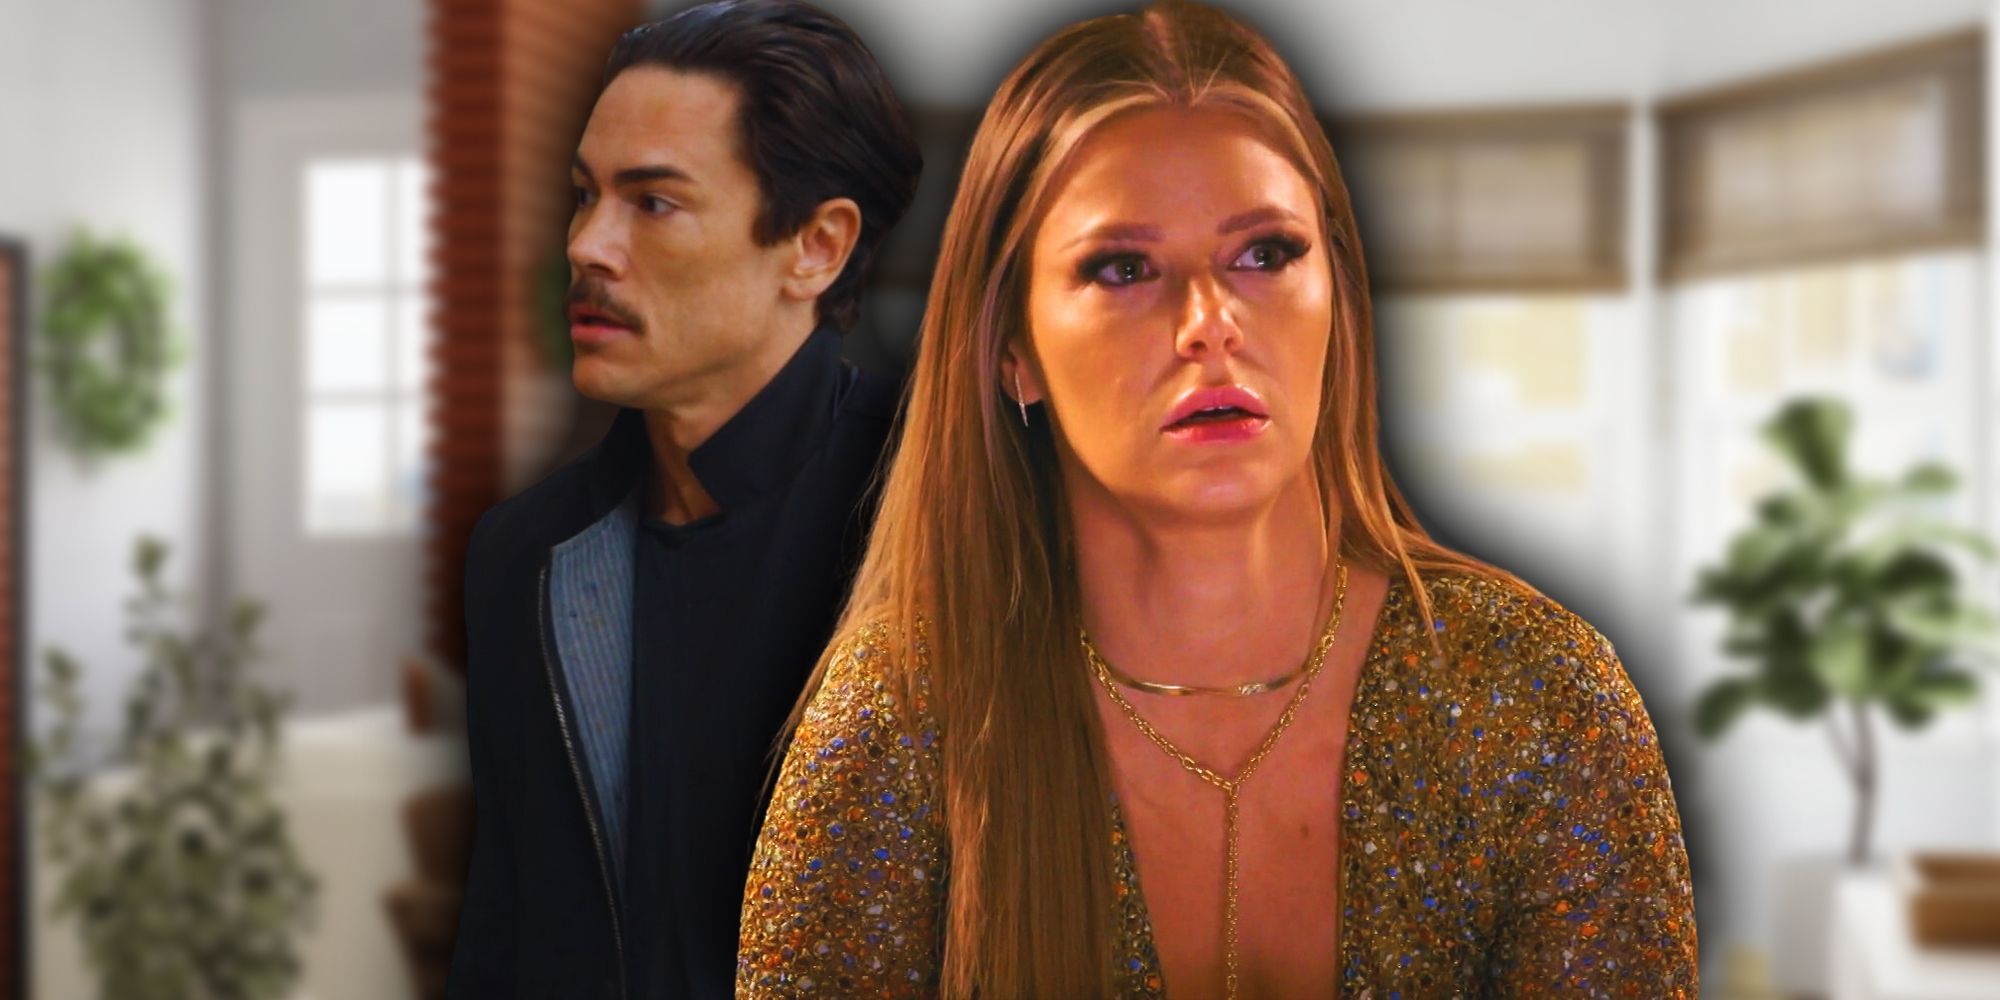 Side by side images of Vanderpump Rules' Tom Sandoval and Ariana Madix